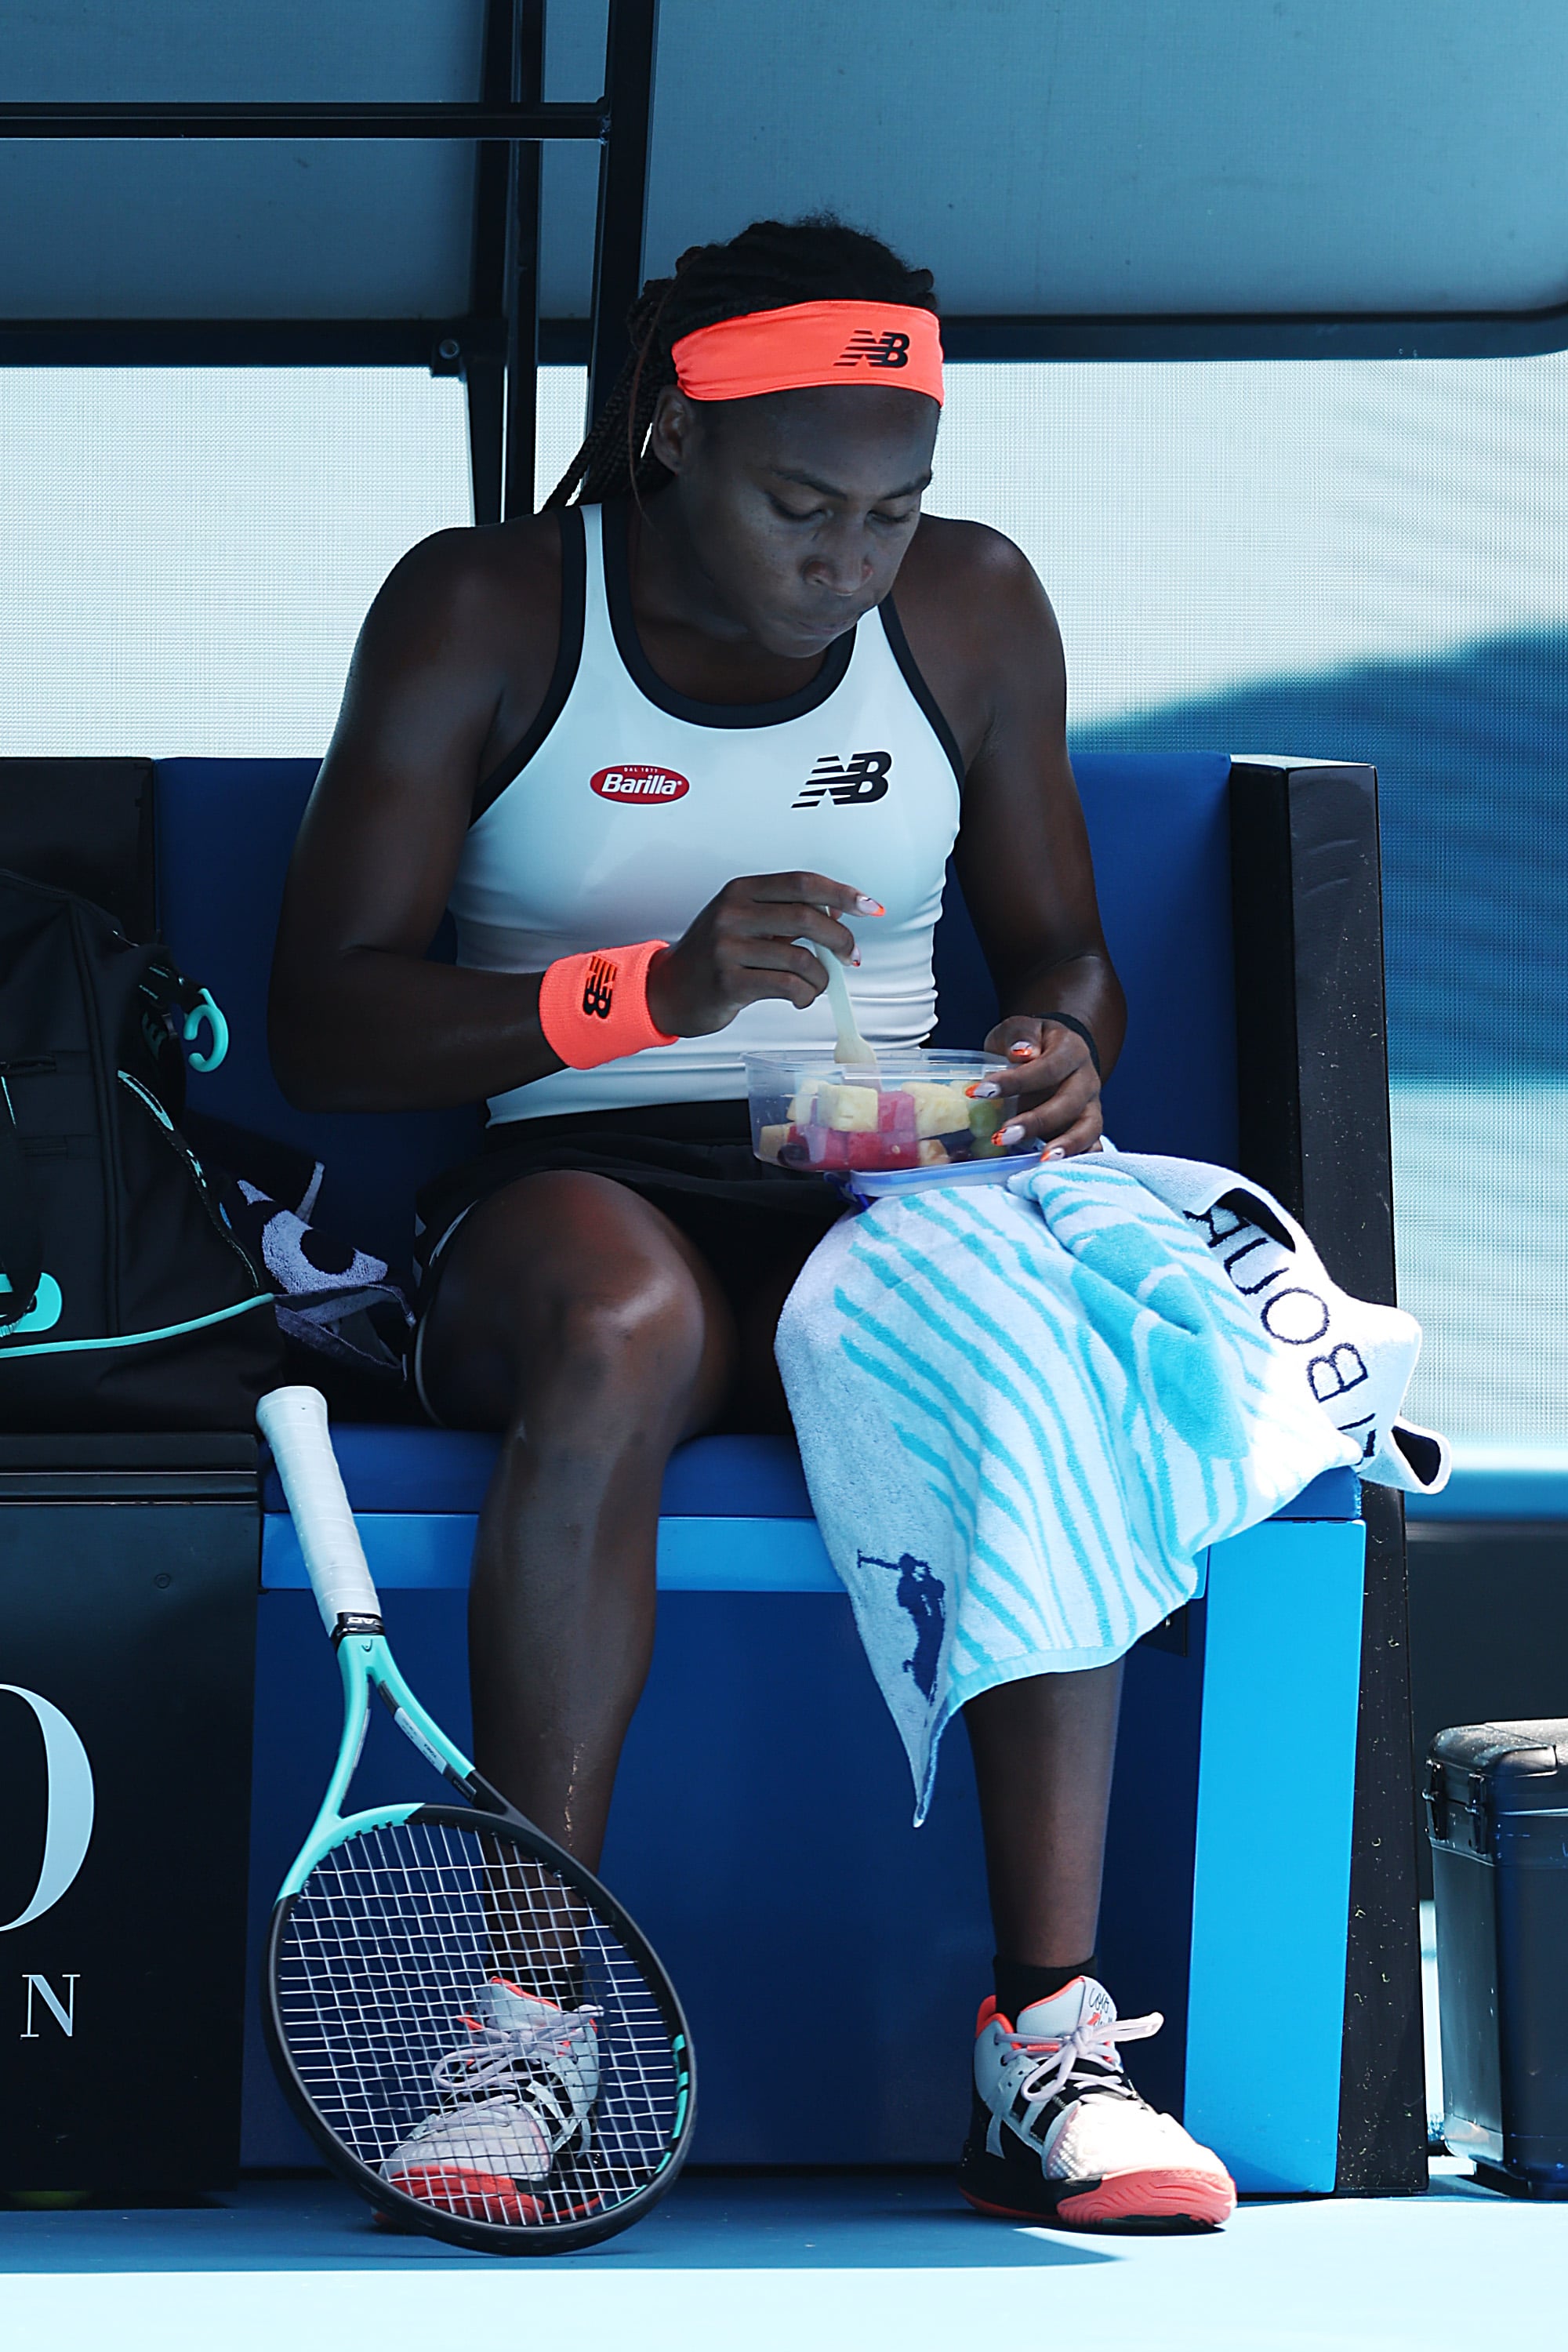 MELBOURNE, AUSTRALIA - JANUARY 22: Coco Gauff of the United States eats fruit salad at a change of ends during the fourth round singles match against Jelena Ostapenko of Latvia during day seven of the 2023 Australian Open at Melbourne Park on January 22, 2023 in Melbourne, Australia. (Photo by Cameron Spencer/Getty Images)